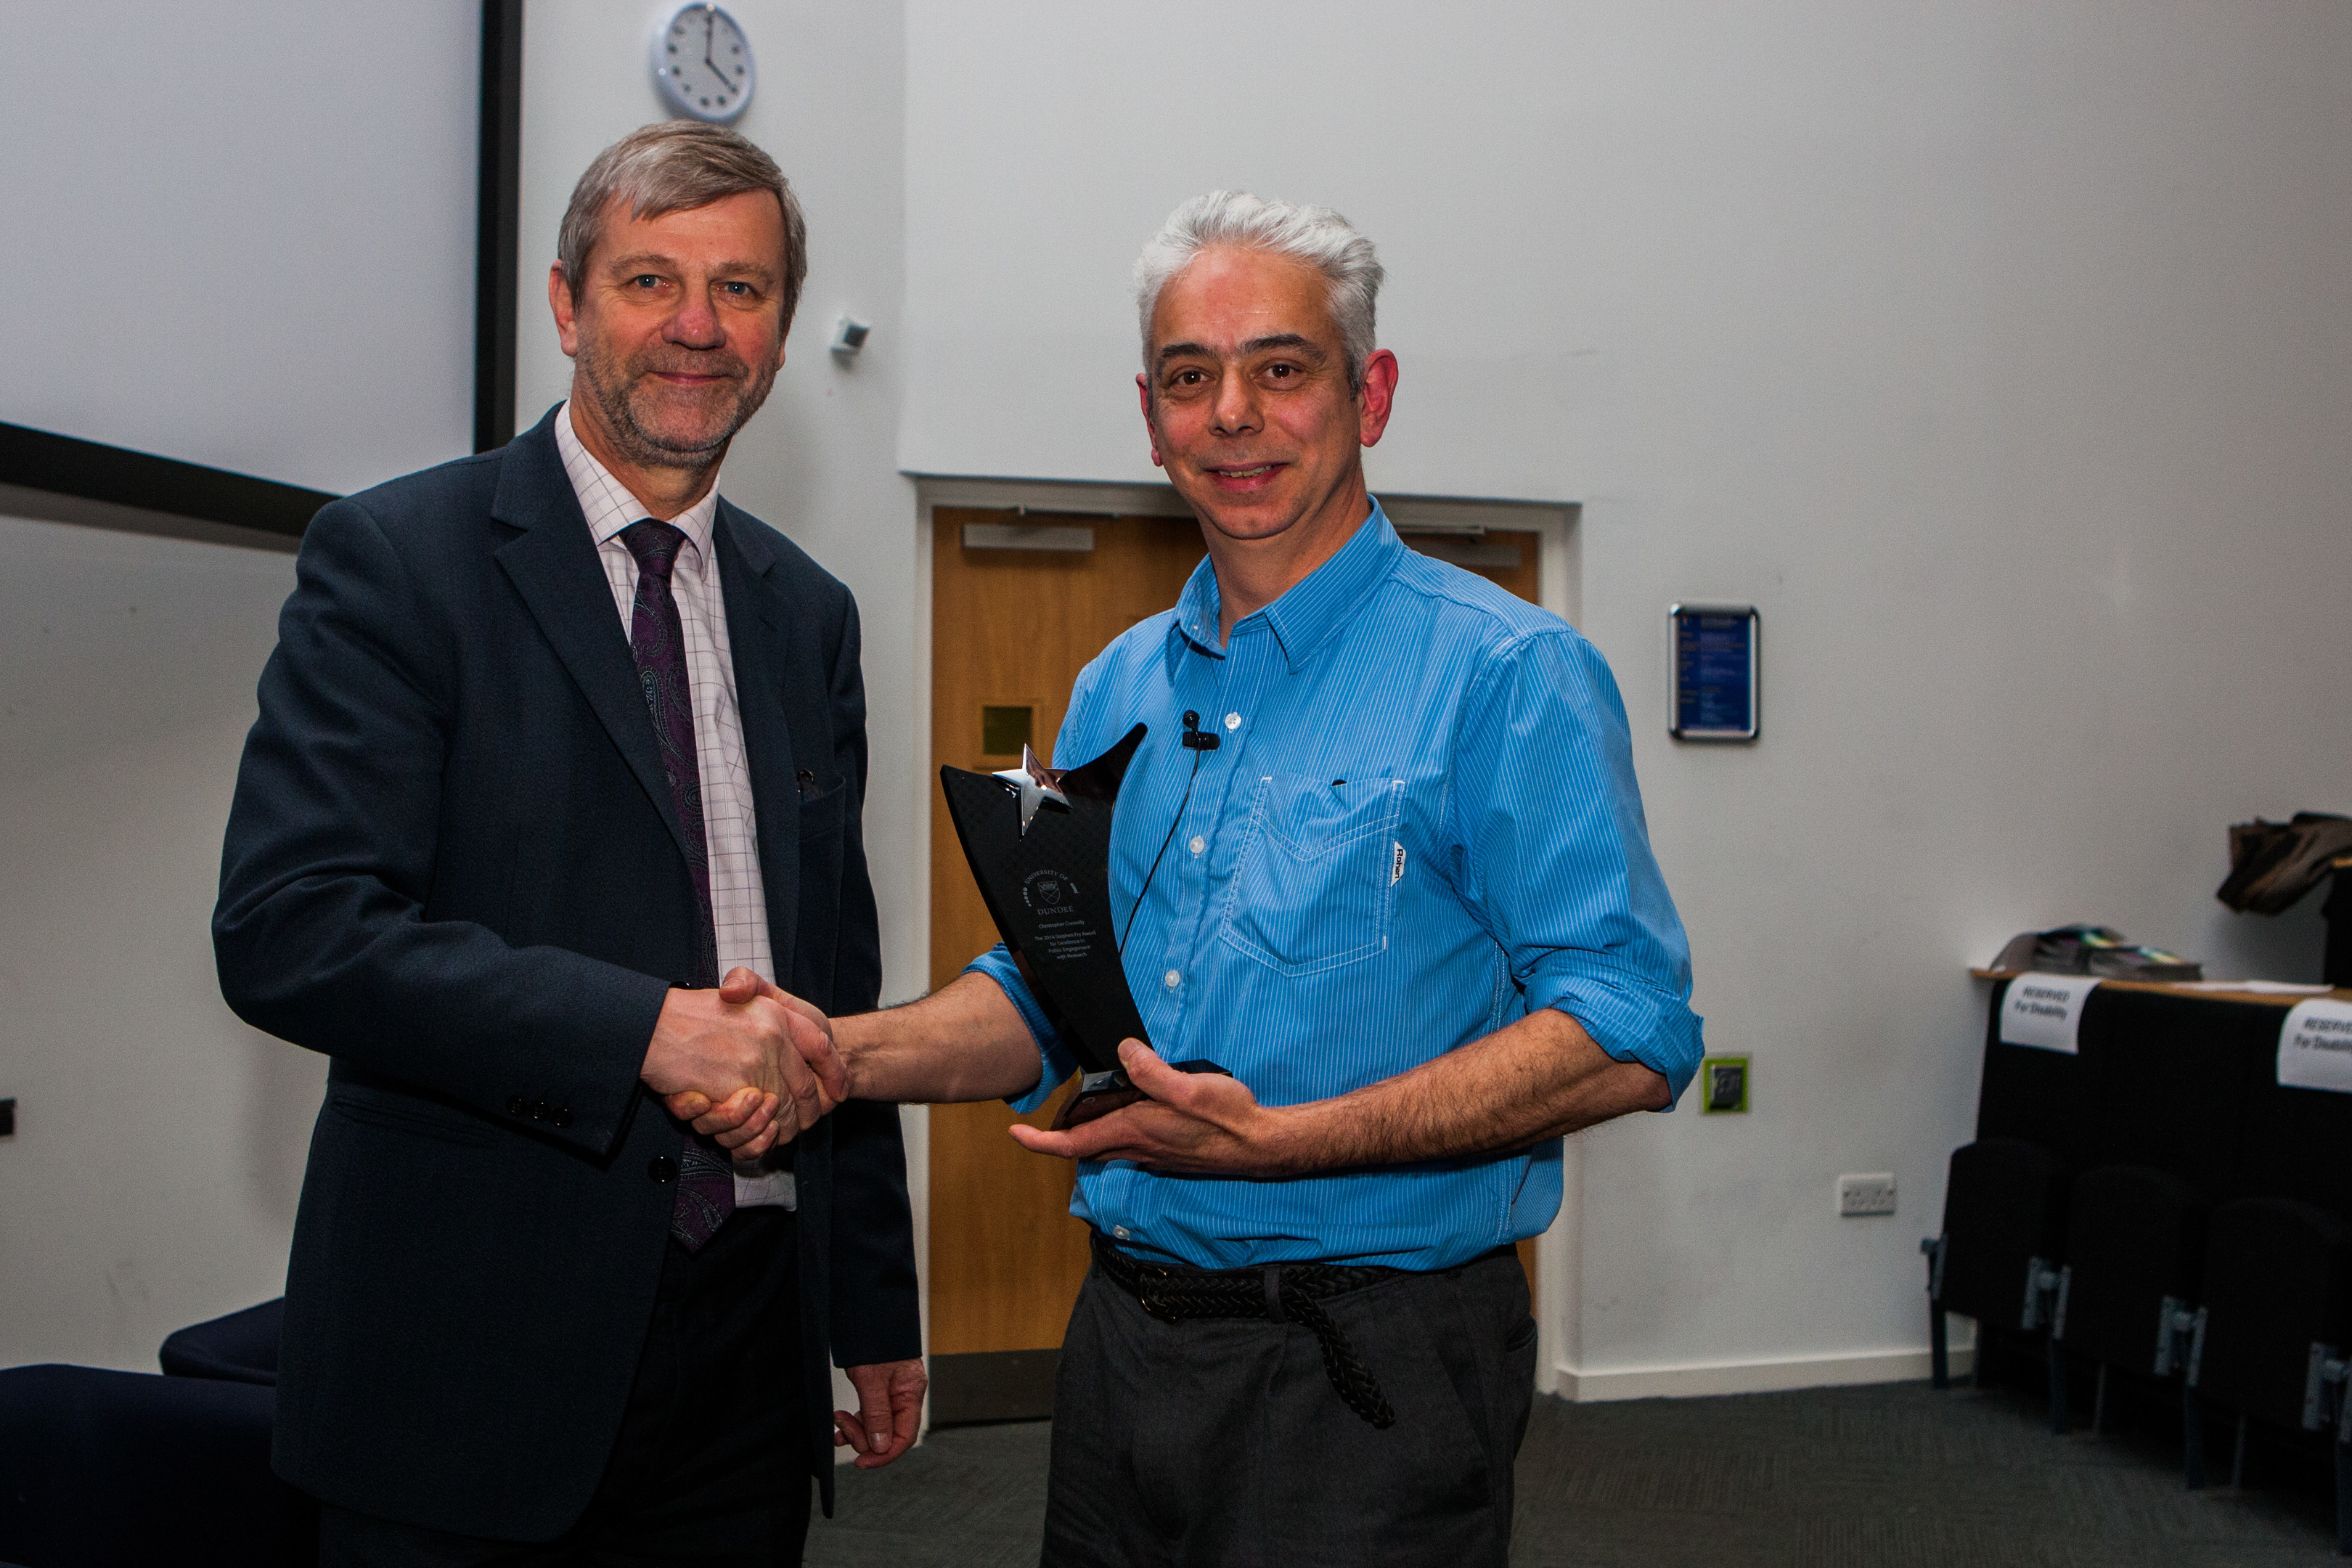 Dr Christopher Connolly (right) receives Dundee University's Stephen Fry Award for Excellence in Public Engagement with Research from Professor Pete Downes last year.